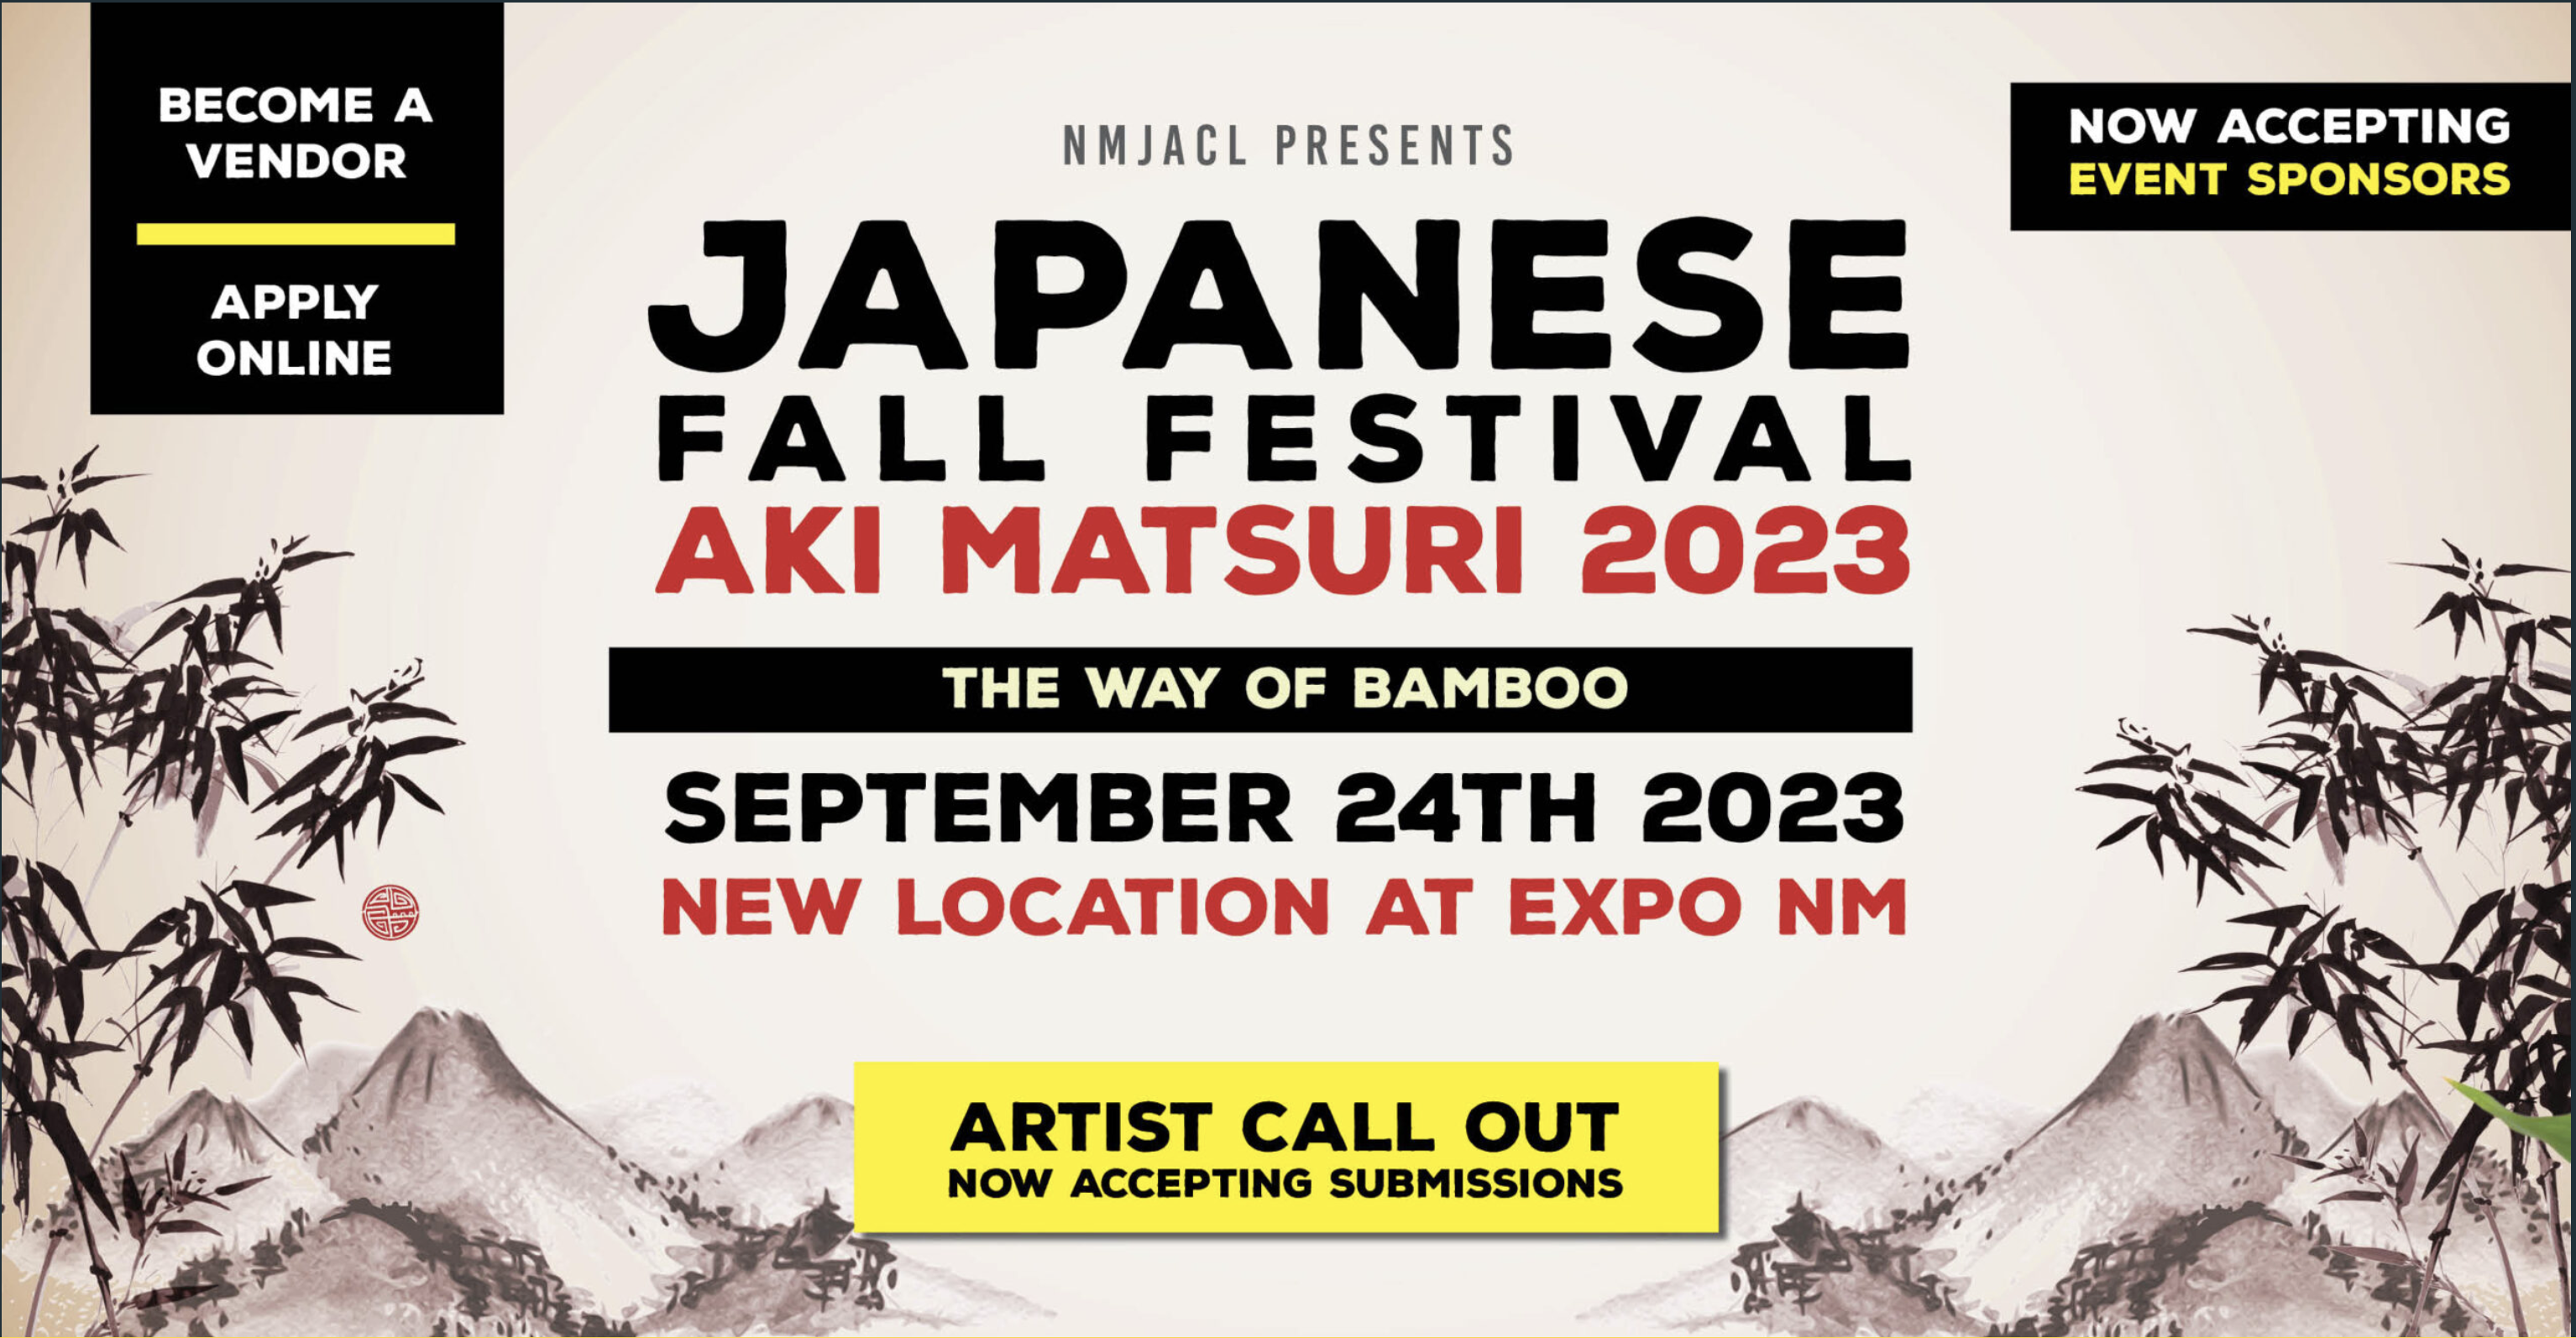 An advertisement for a festival celebrating Japanese art and culture, happening september 24th in Albuquerque, NM.